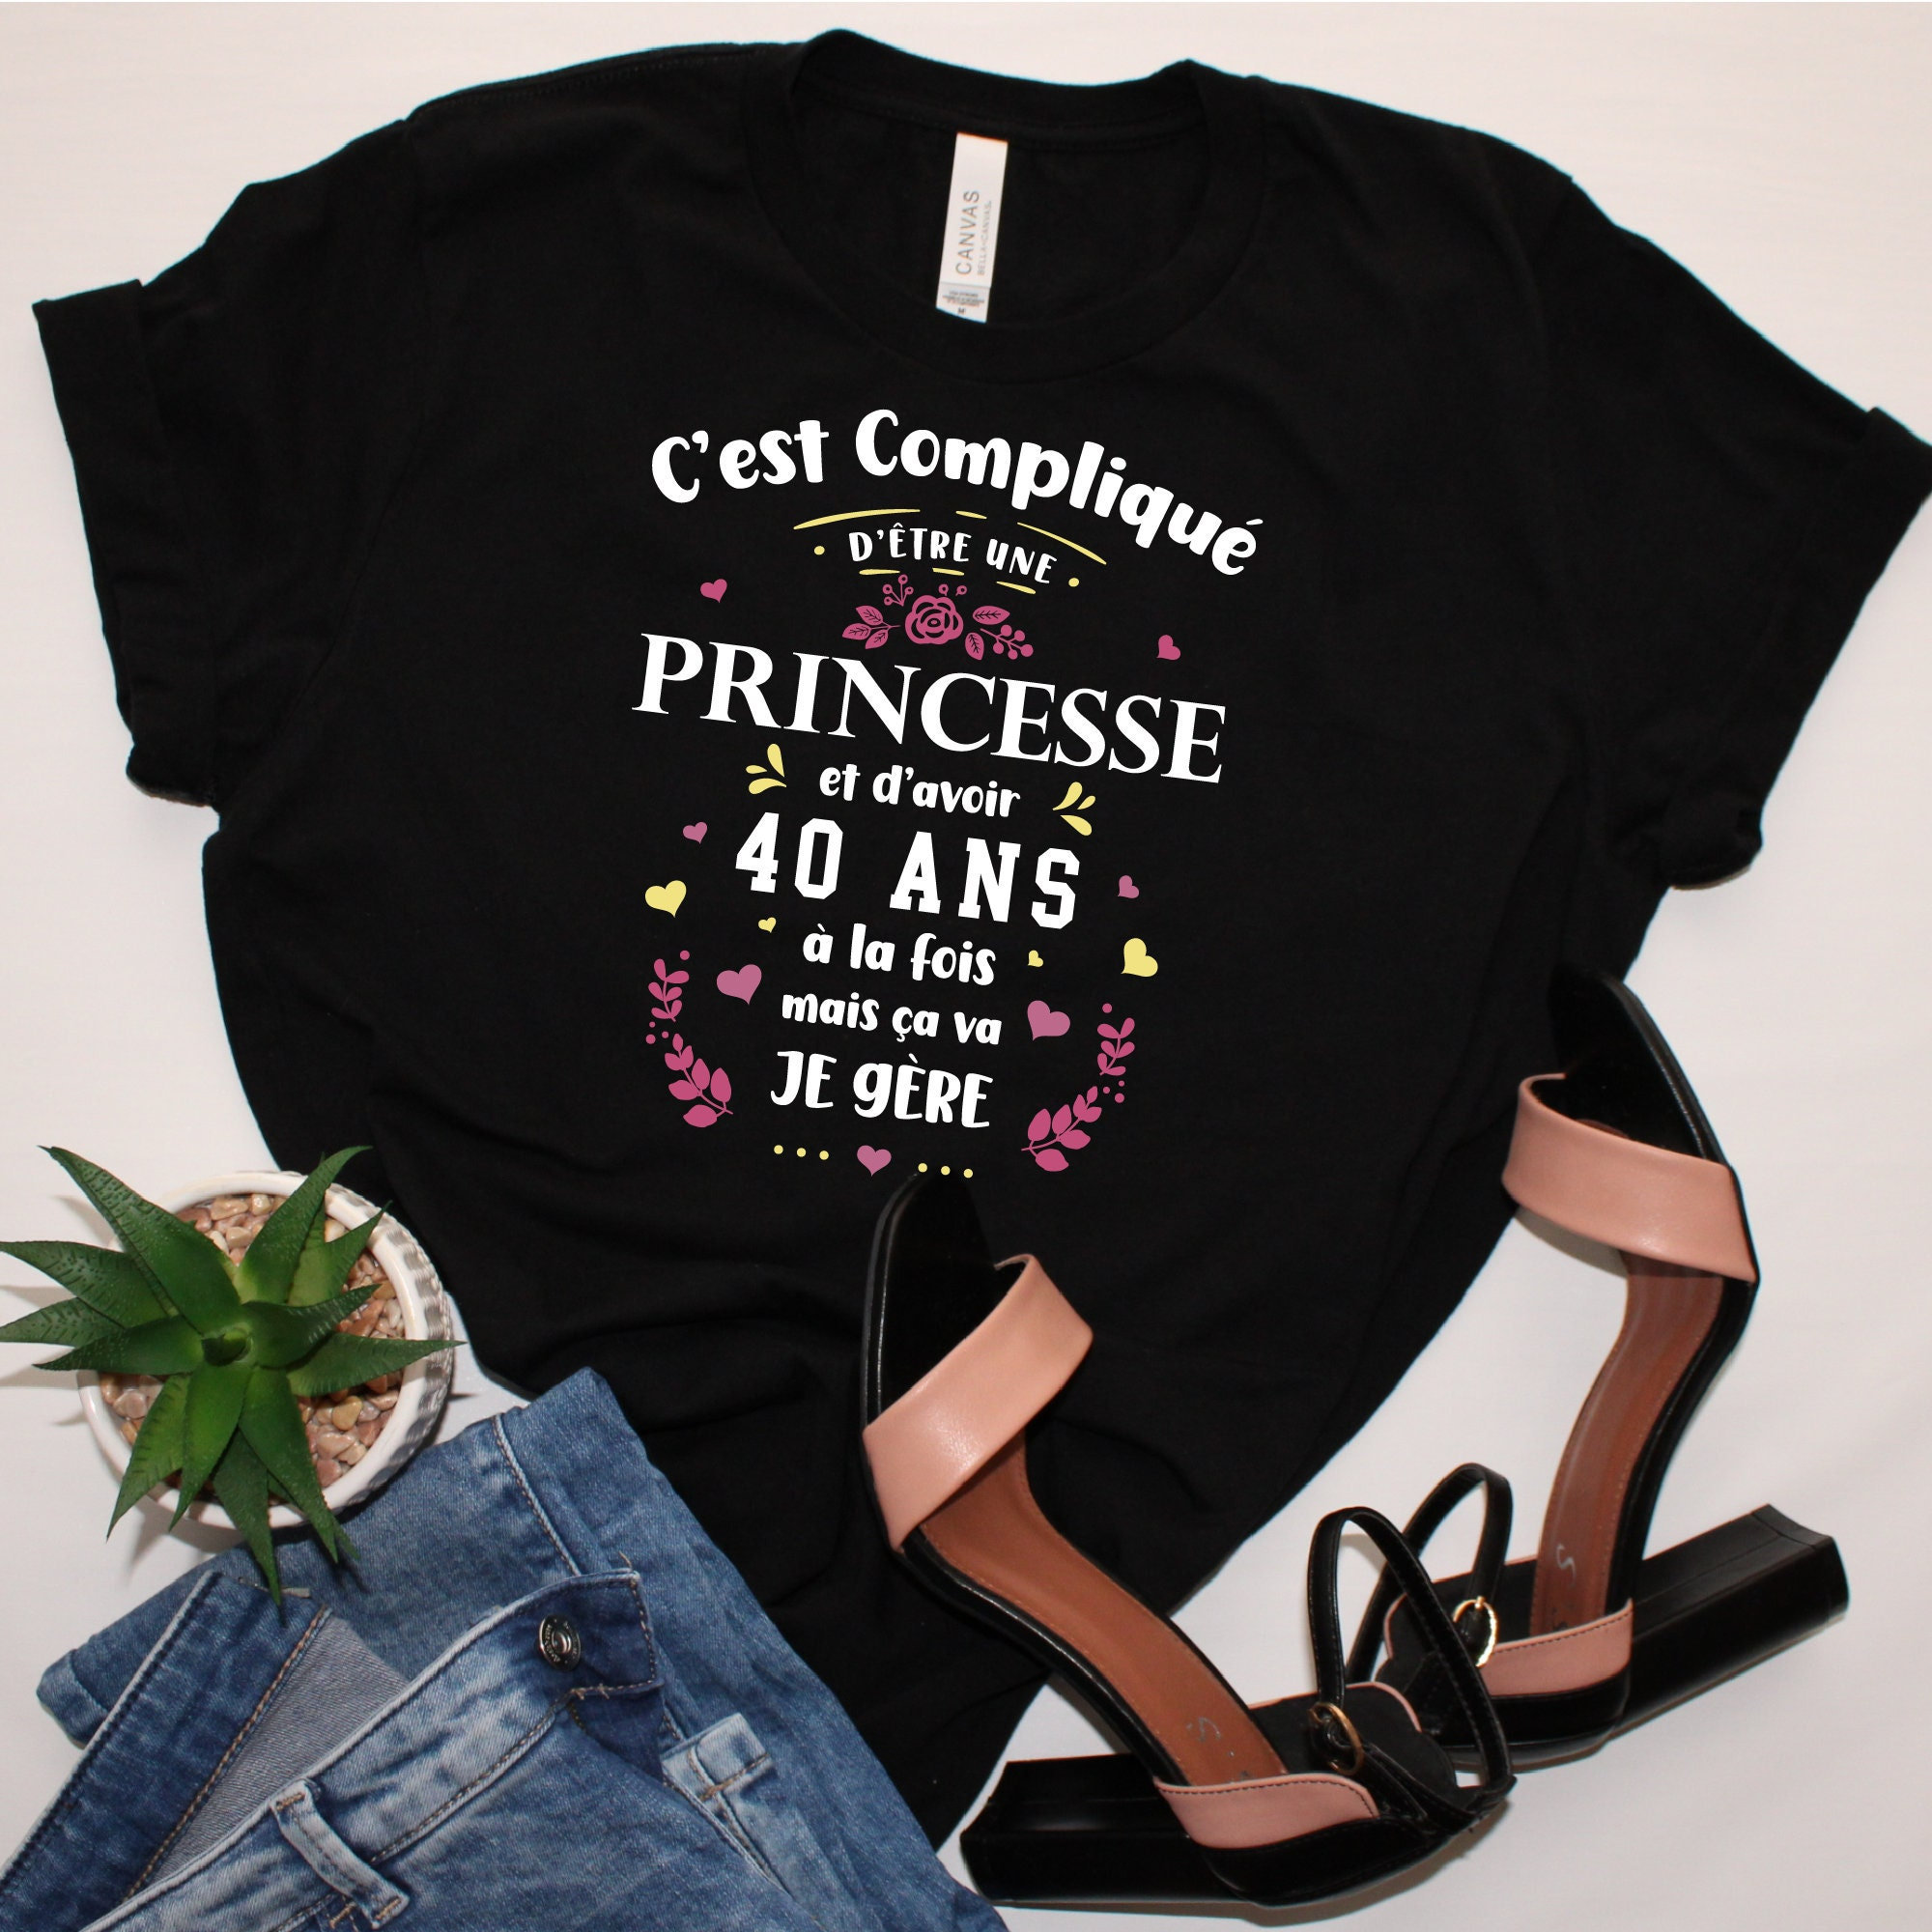 Compare prices for 40 Ans Anniversaire Pour Femme Homme across all